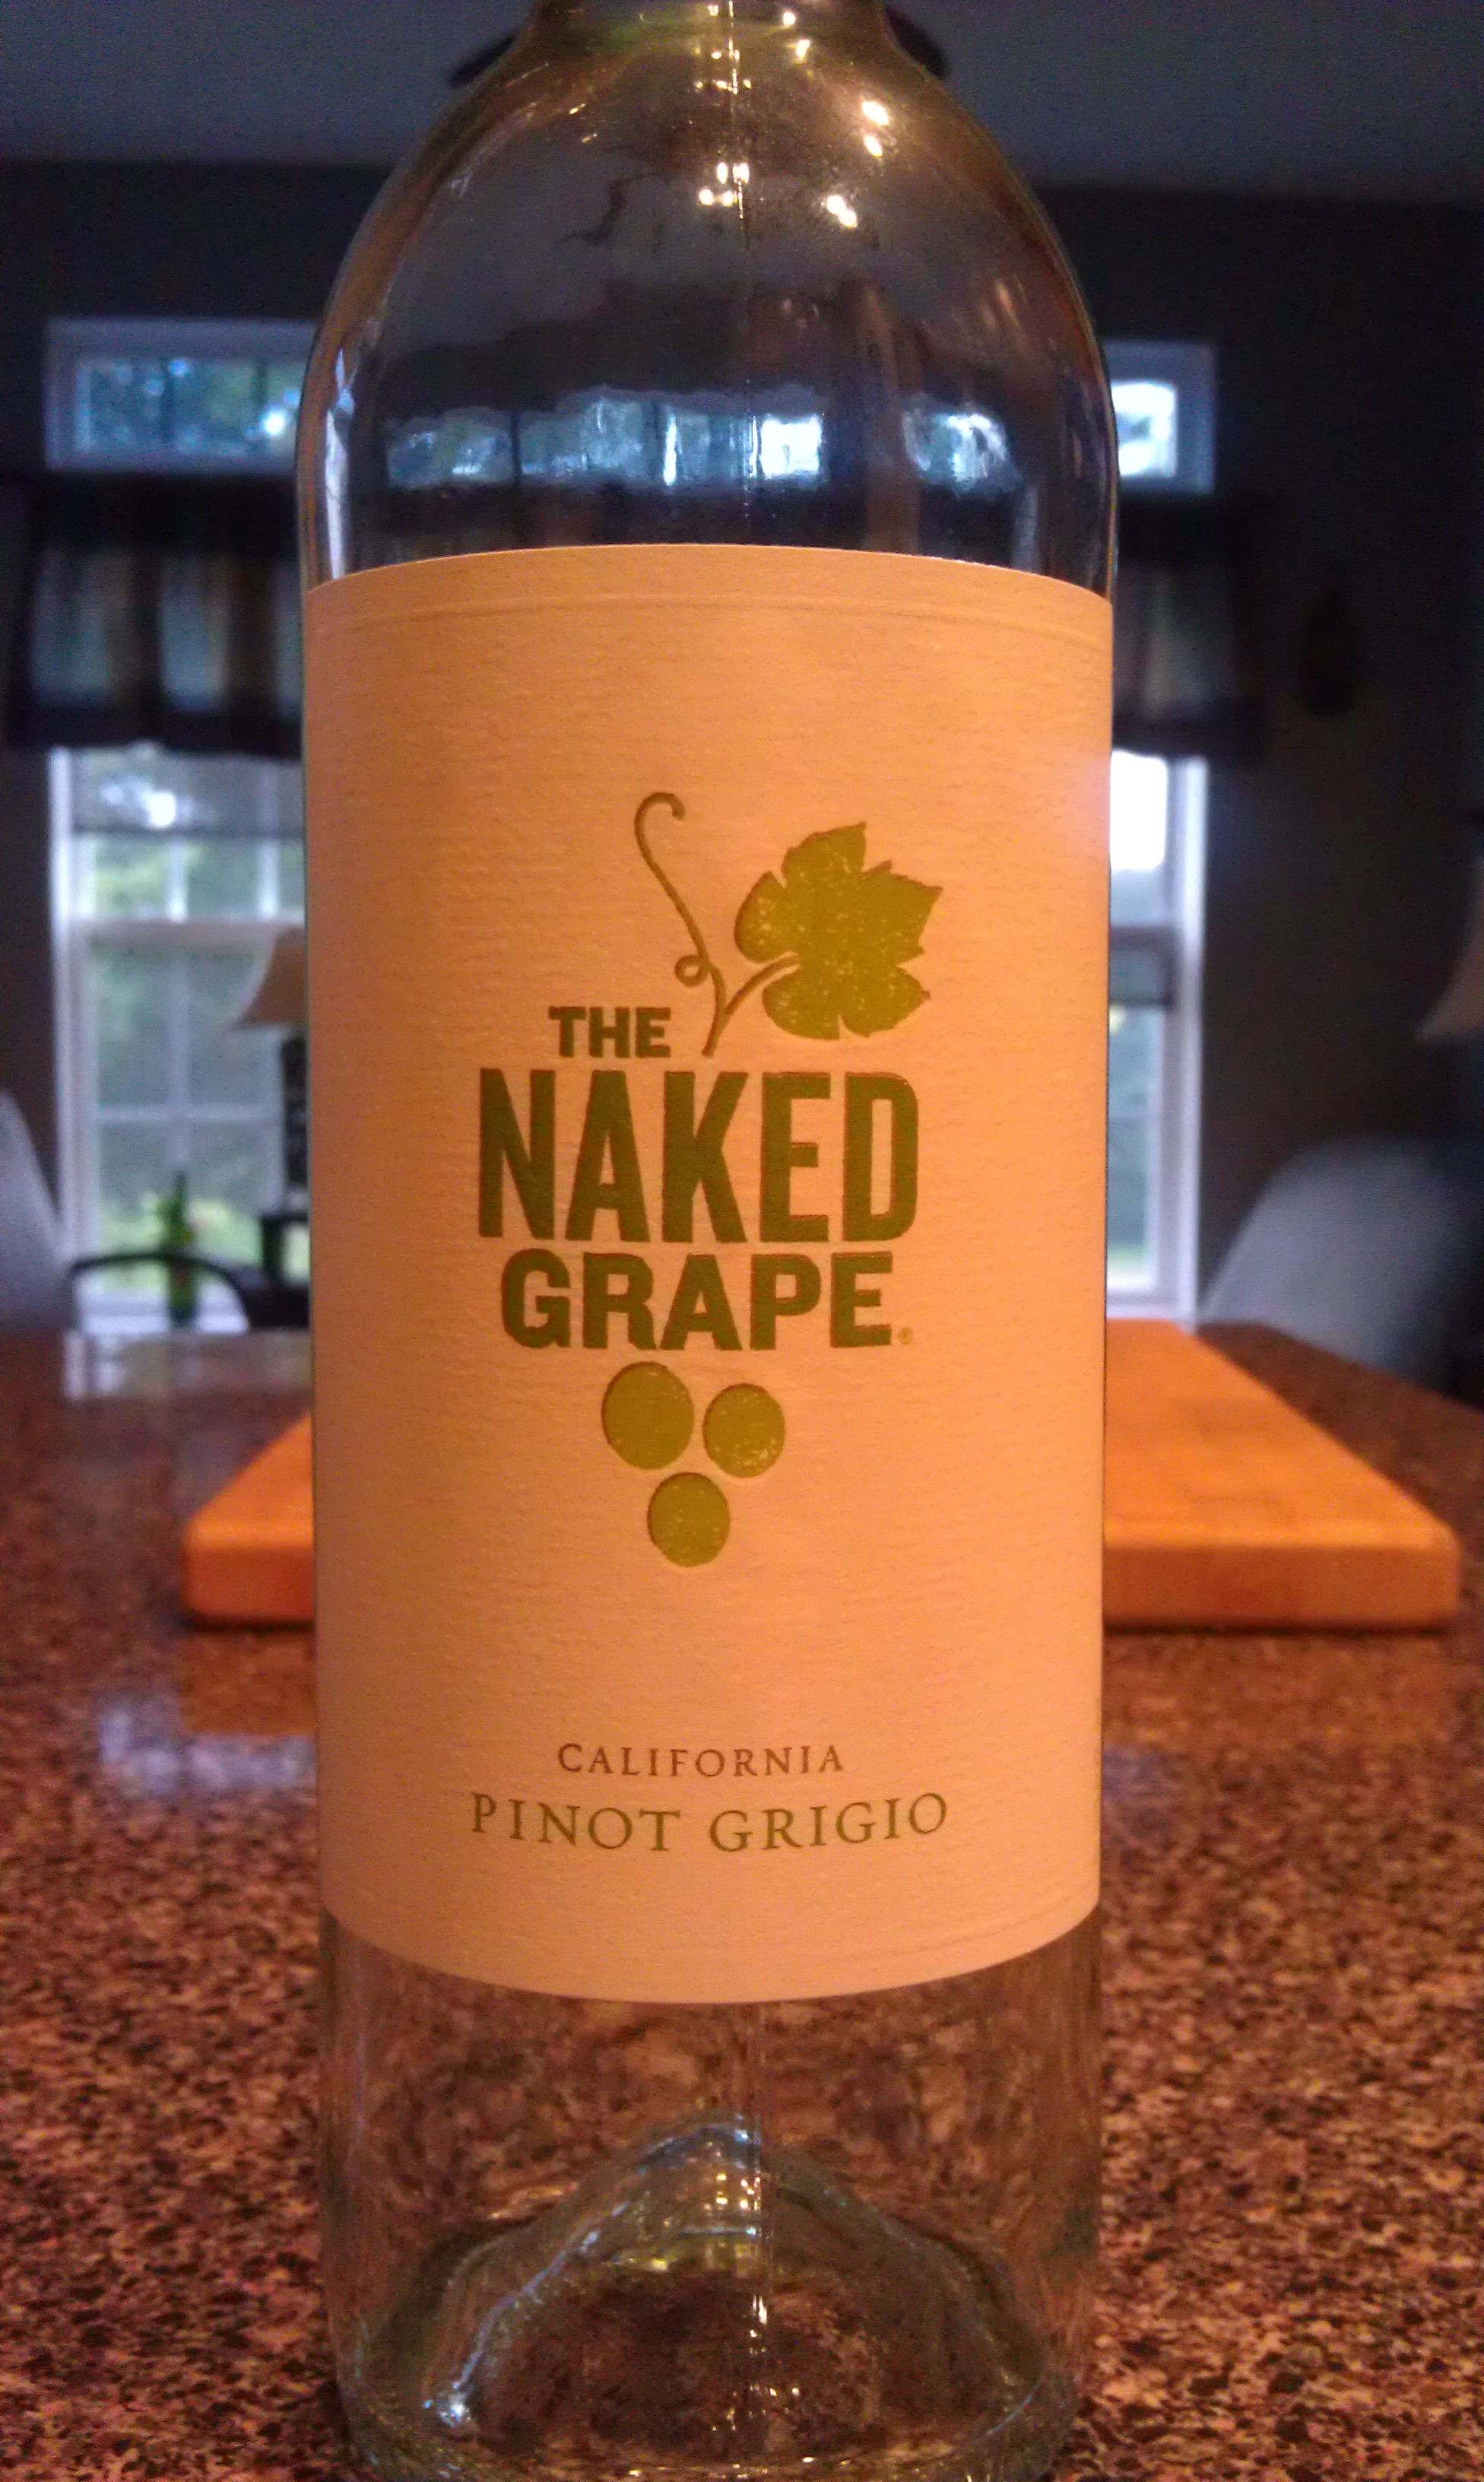 Benitos Wine Reviews: The Naked Grape